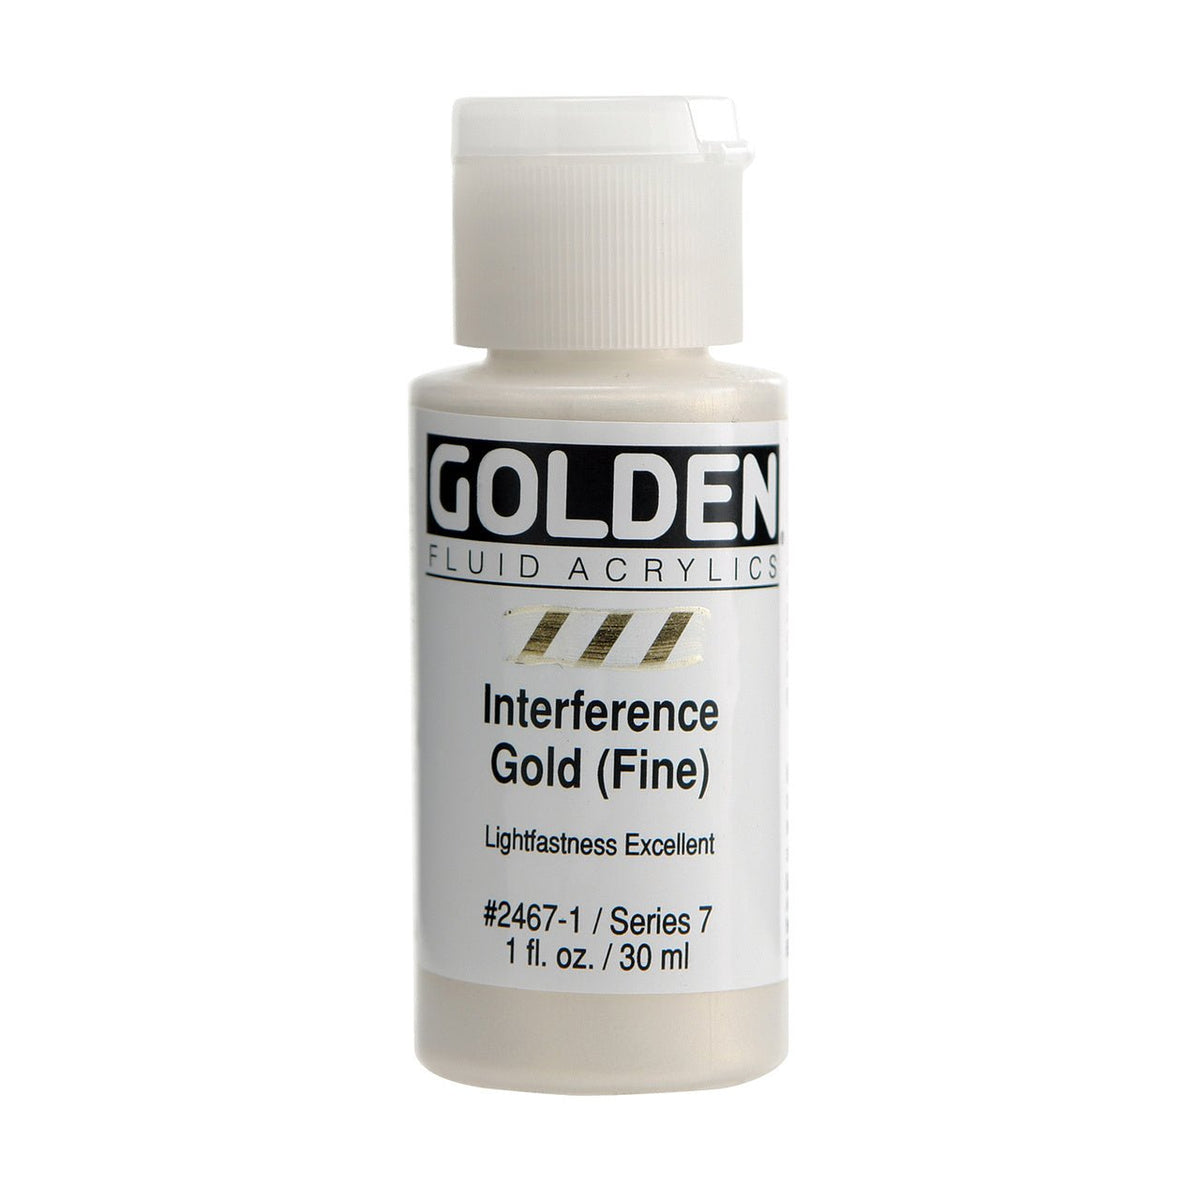 Golden Fluid Acrylic Interference Gold (fine) 1 oz - merriartist.com